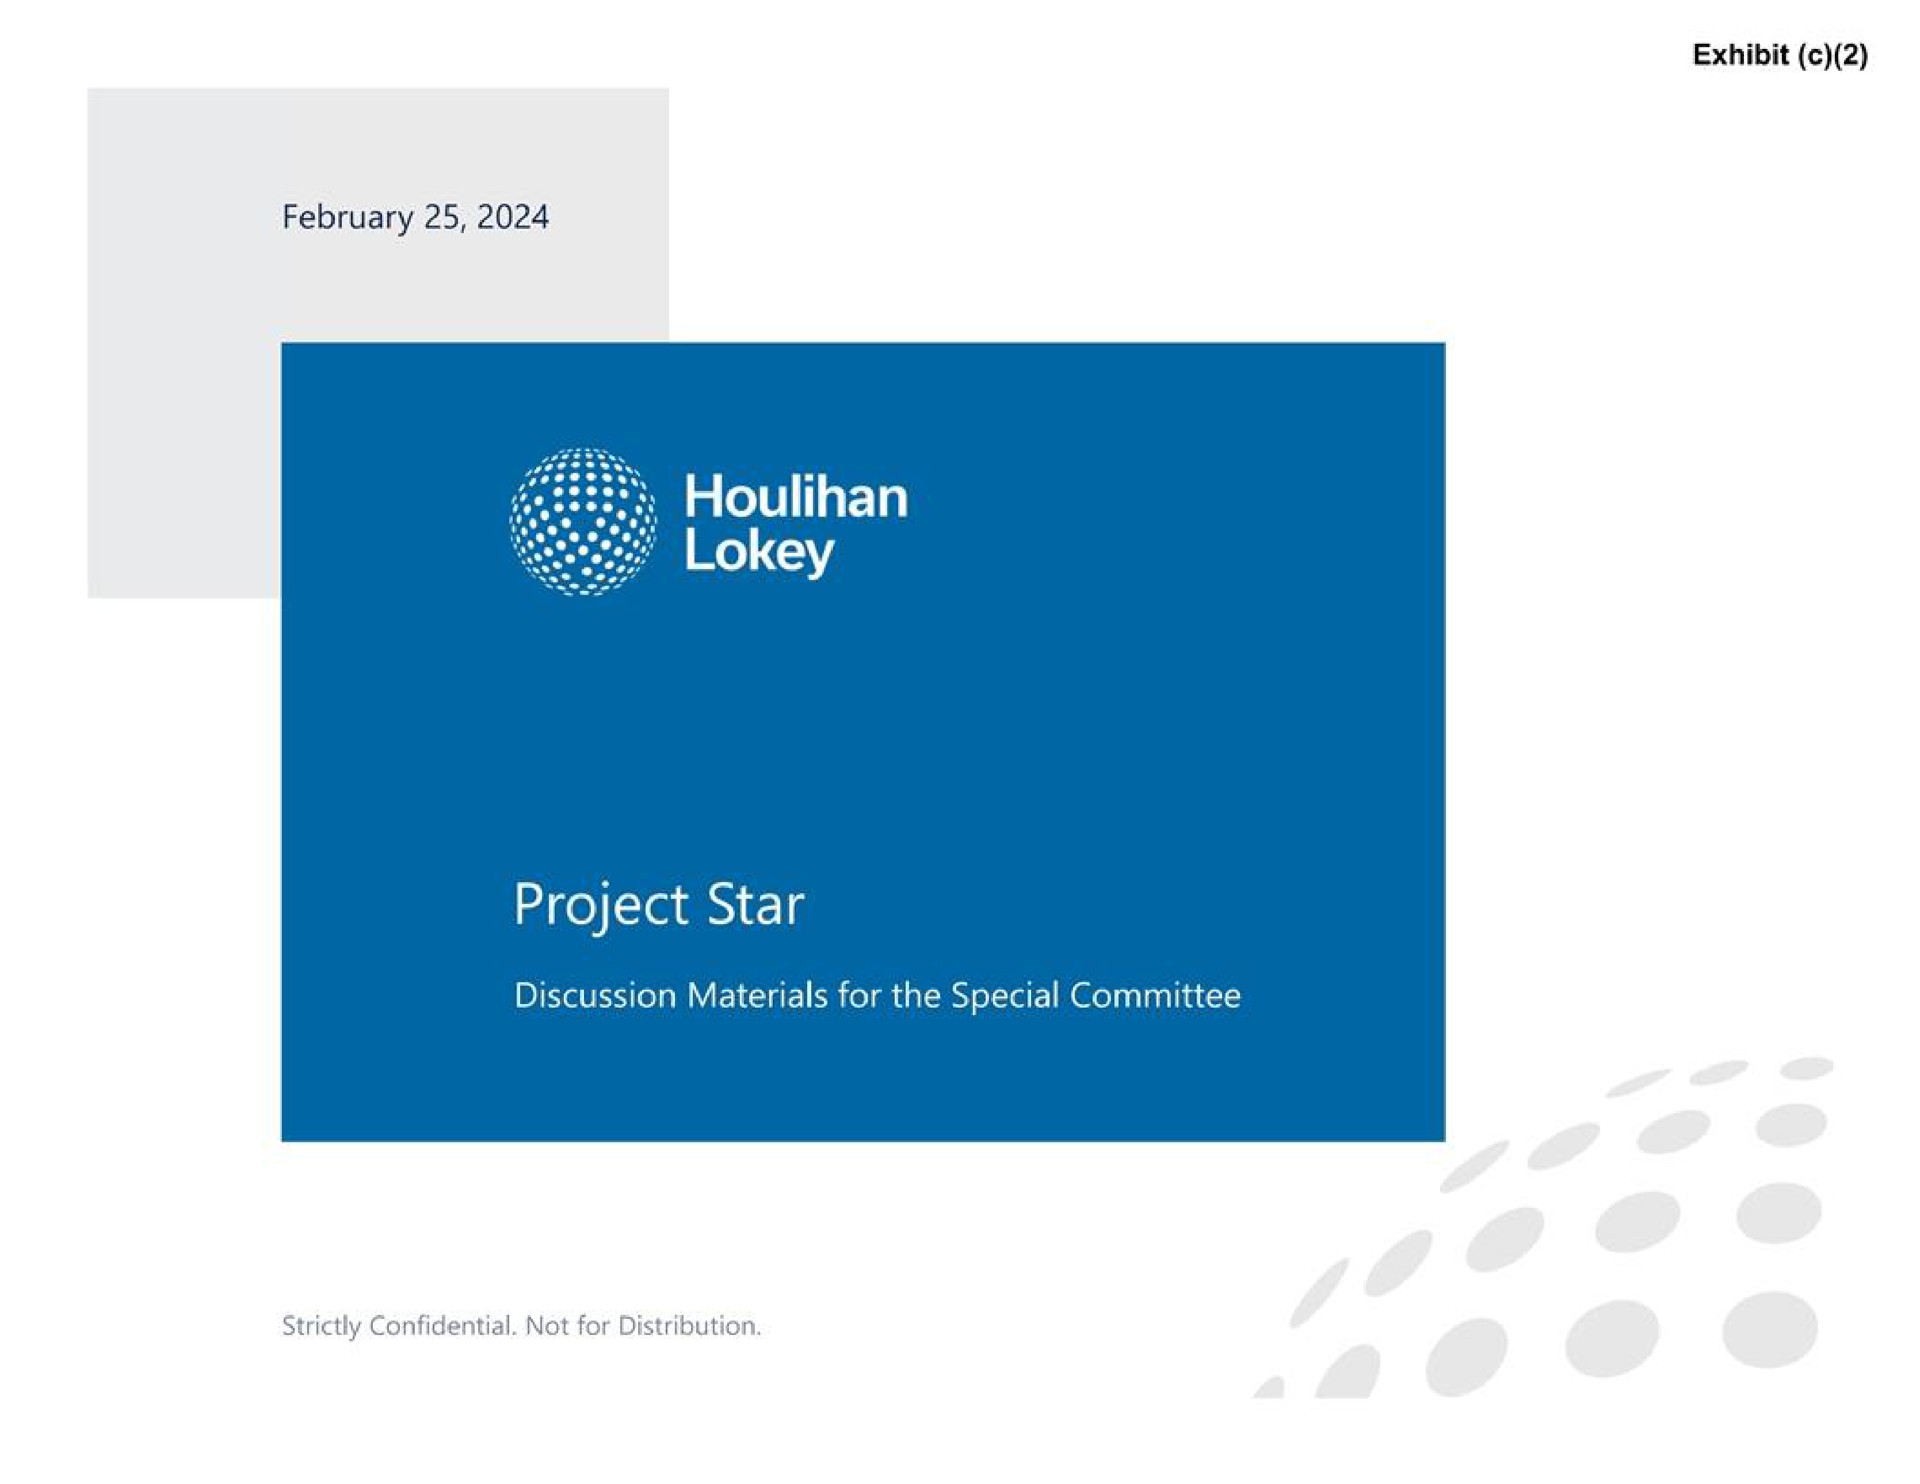 am a project star discussion materials for the special committee | Houlihan Lokey